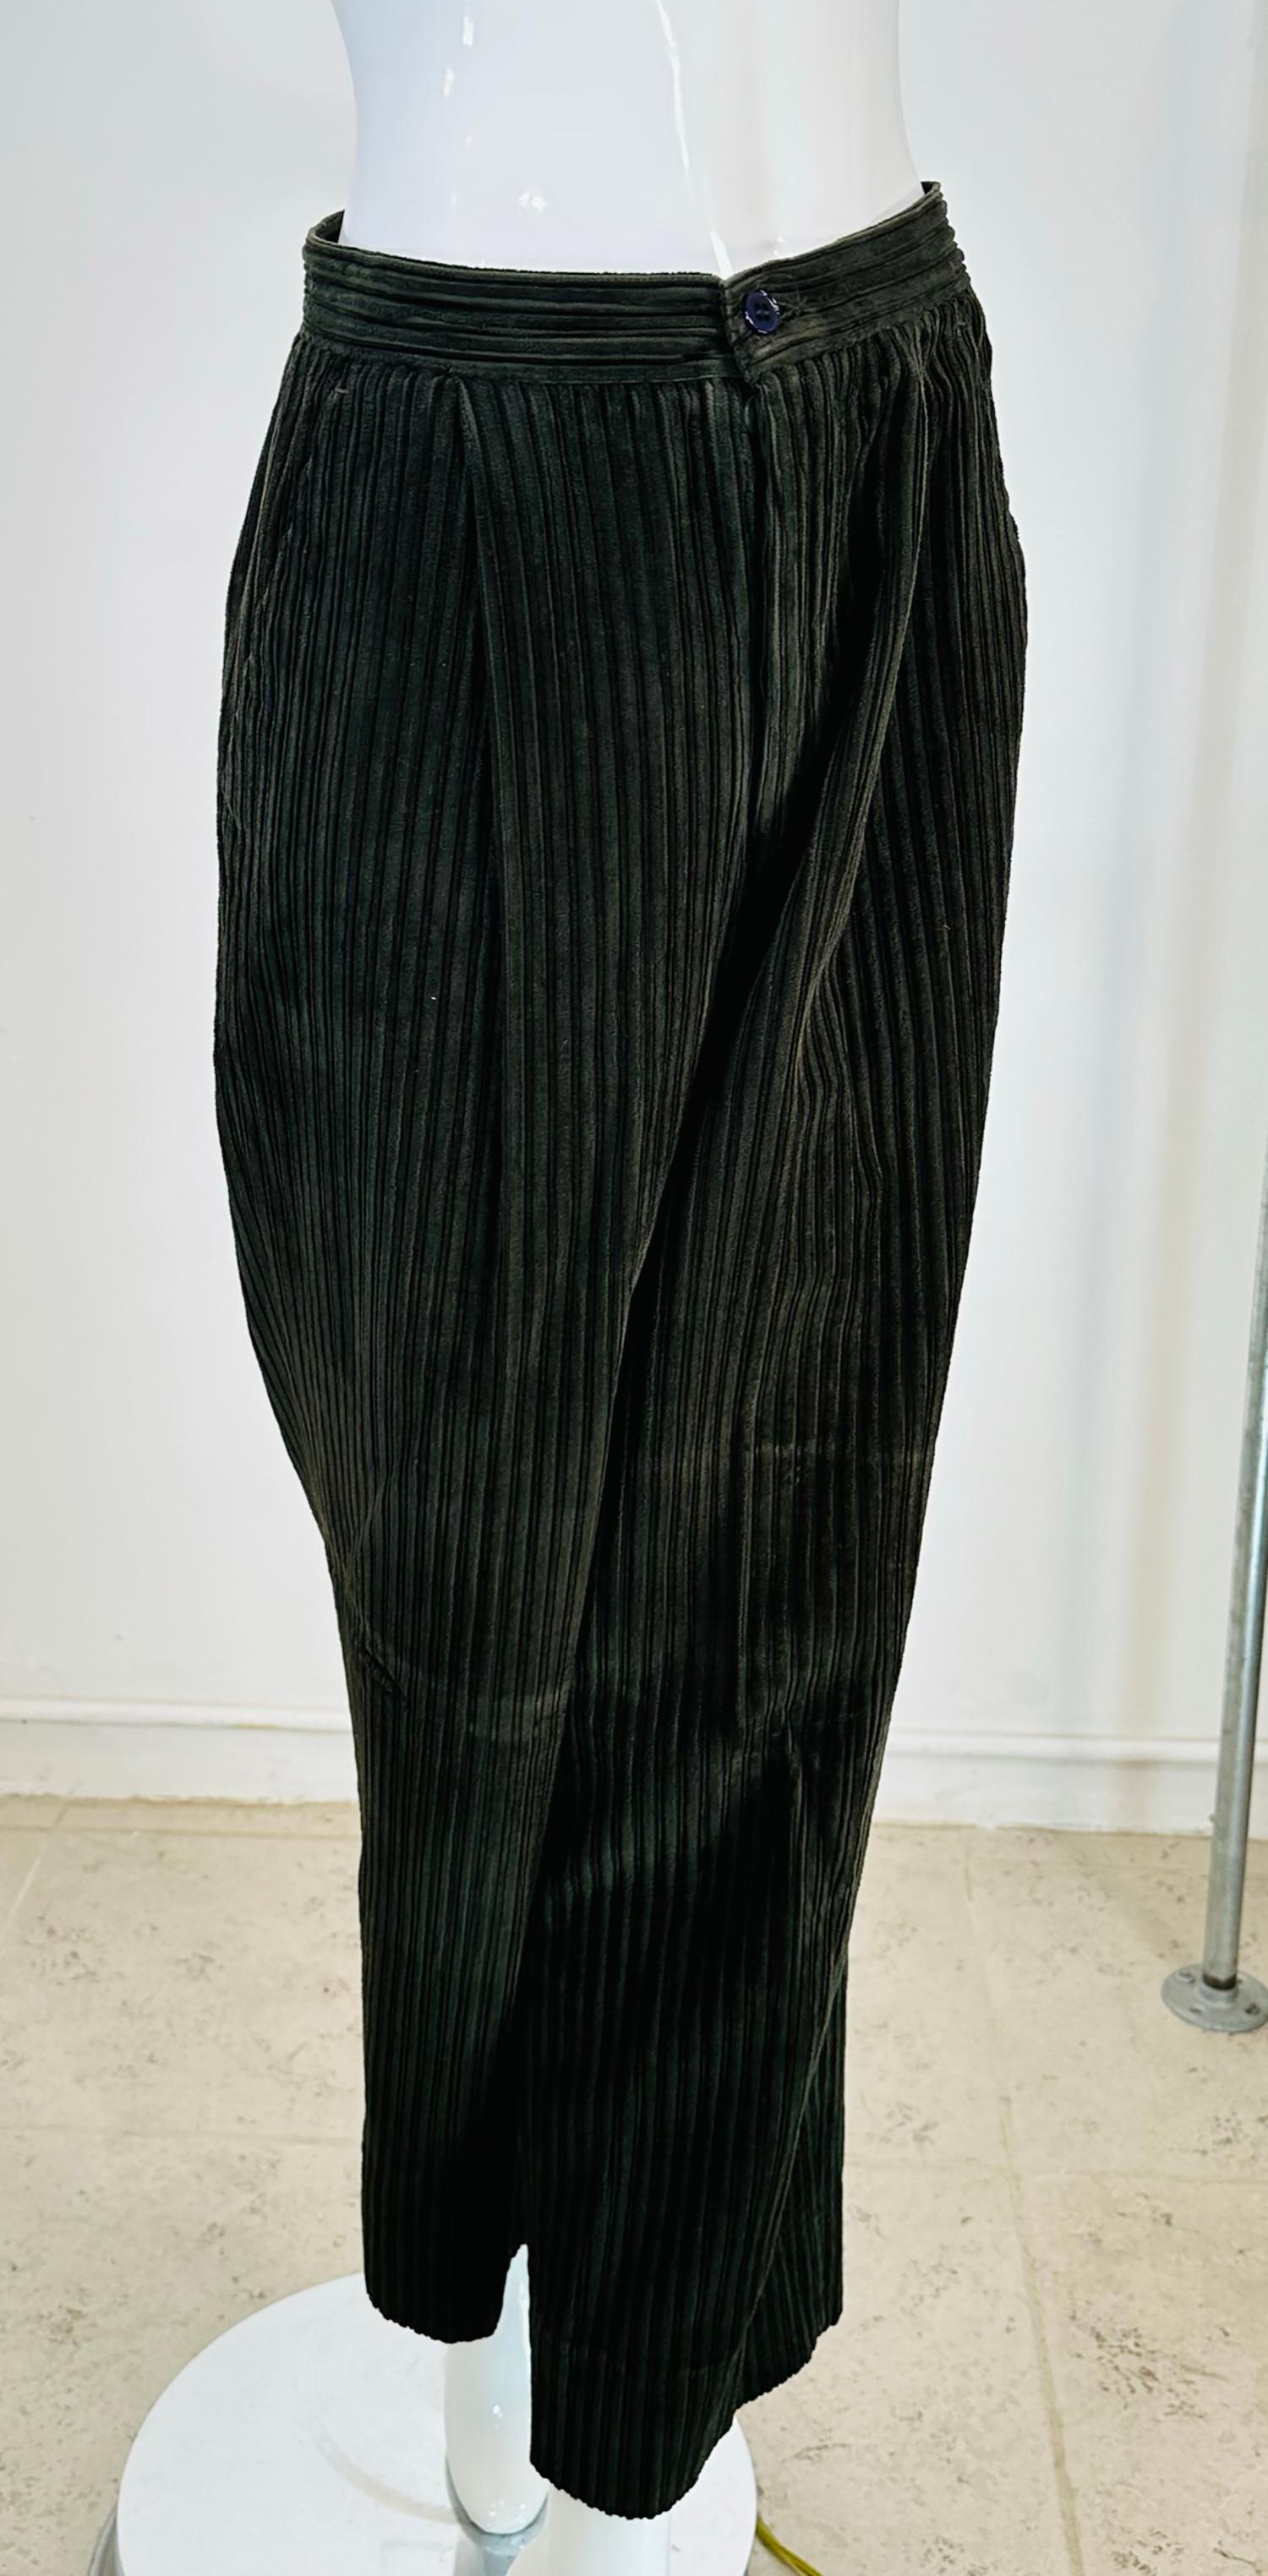 Romeo Gigli, G Gigli 1990s grey/green wide wale corduroy man tailored pants. Soft dark greyish/green colour trousers in a soft corduroy. Banded waist, fly front pant with single pleat at each side front, angled side pockets and a single back pocket.